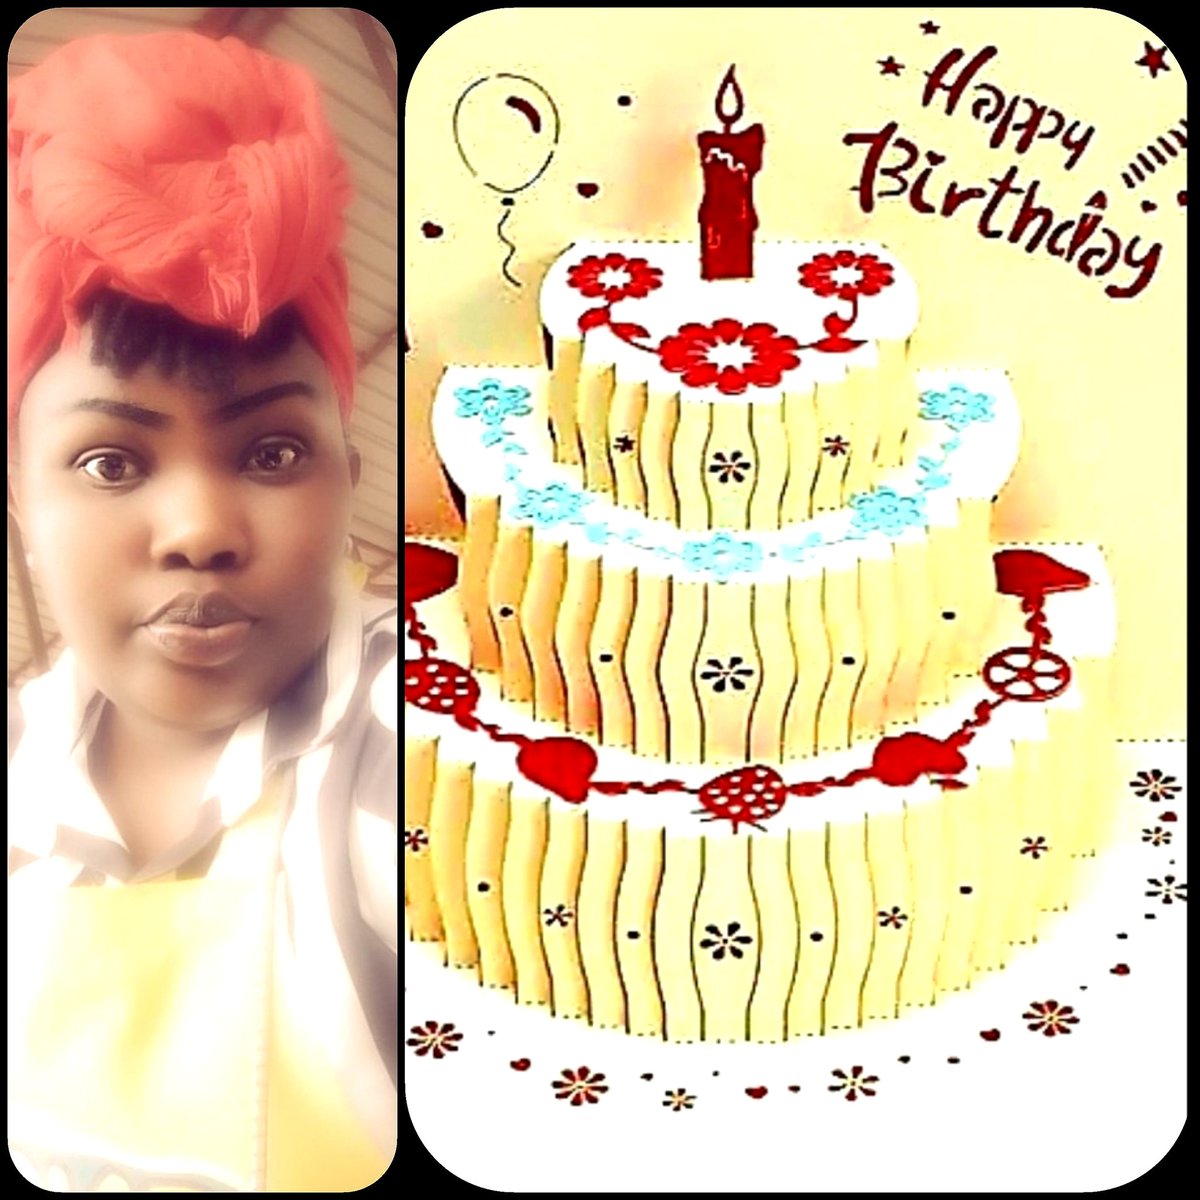 Happiest Birthday to you sister @ateteloxane🎊 
[Rwf30k-Birthdaycake] is delivered to you🎂 
PLEASE, DM your momo to Queen @joselyinechap for delivery✔
Have a blast and enjoy your day; we love you🎊